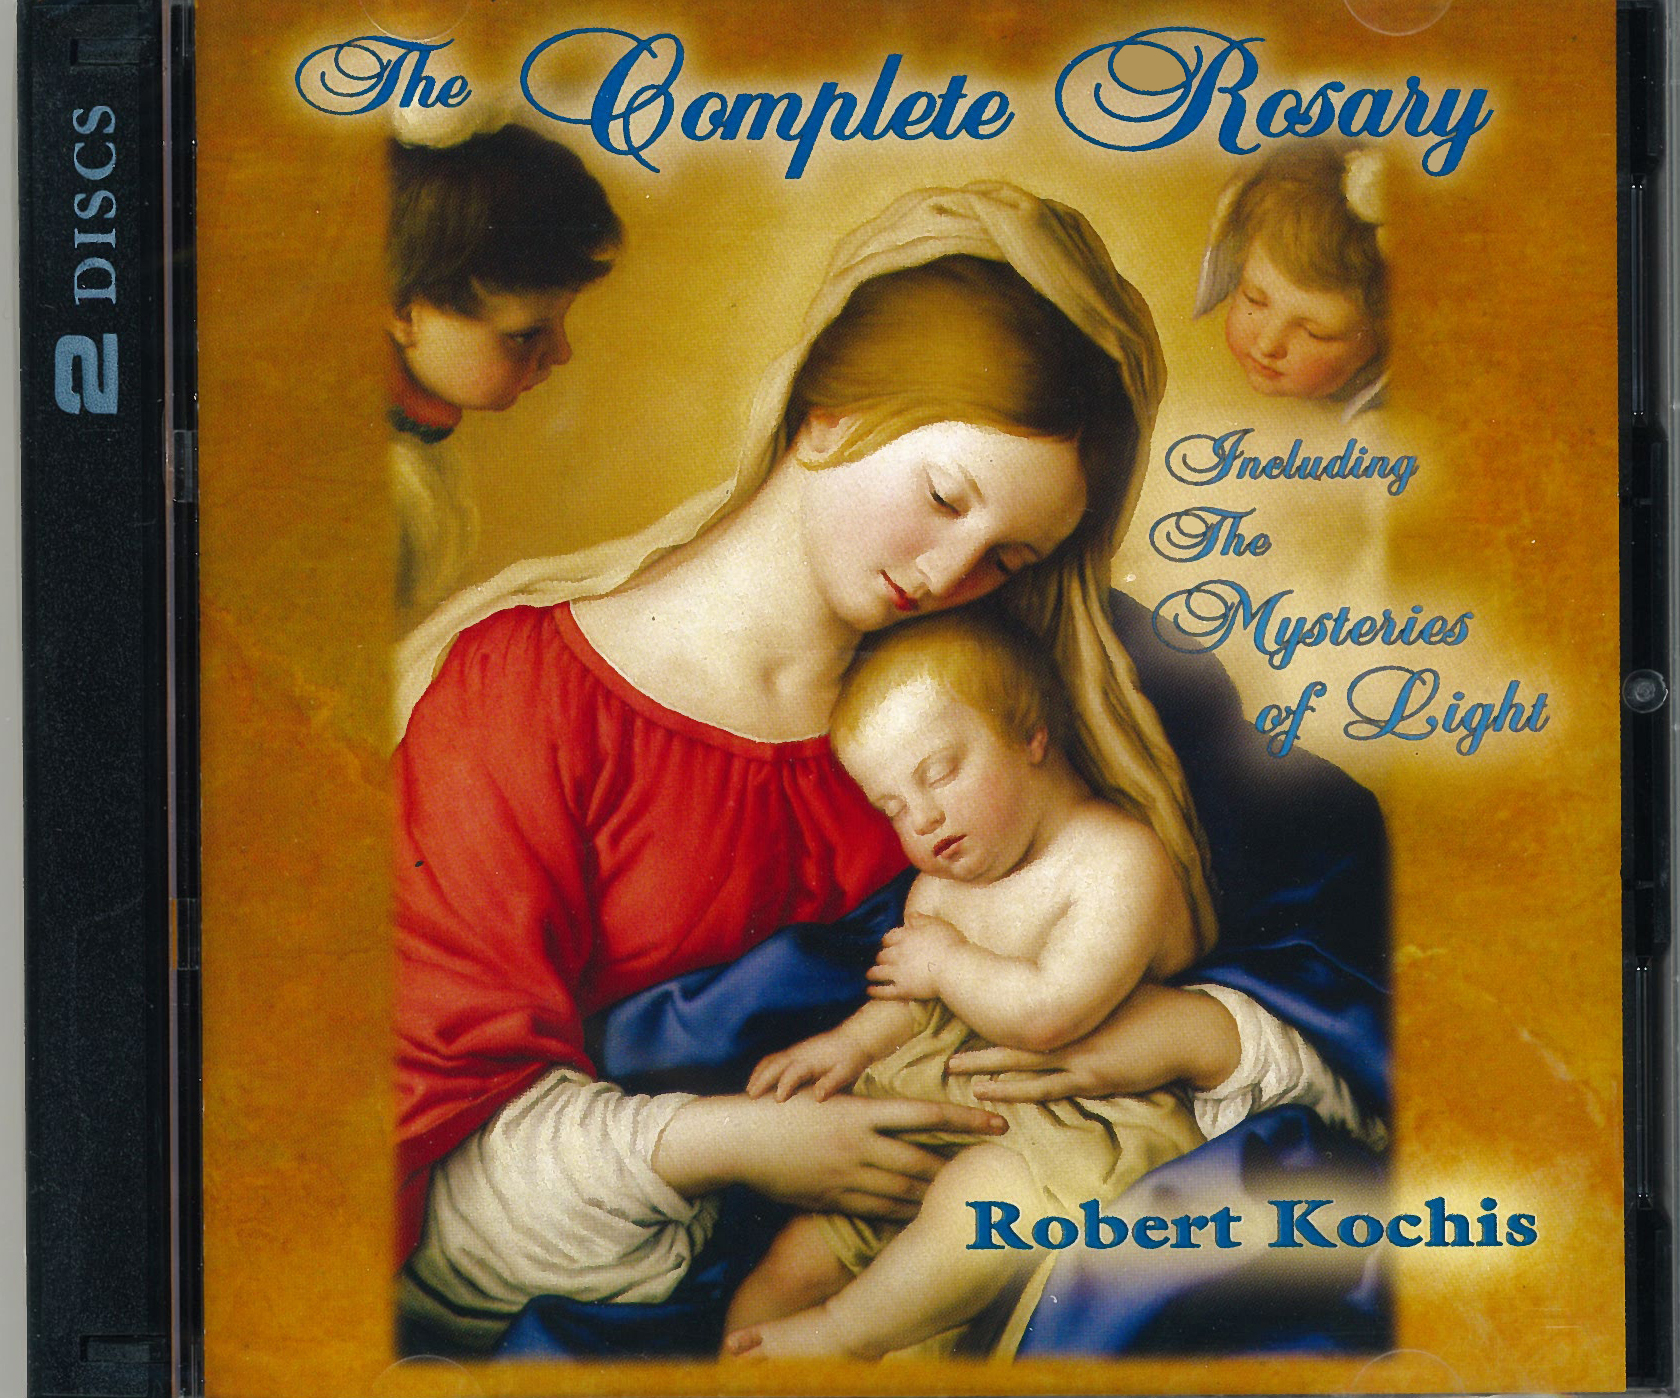 The Complete Rosary: Including The Mysteries of Light with Robert Kochis 88-5911011052